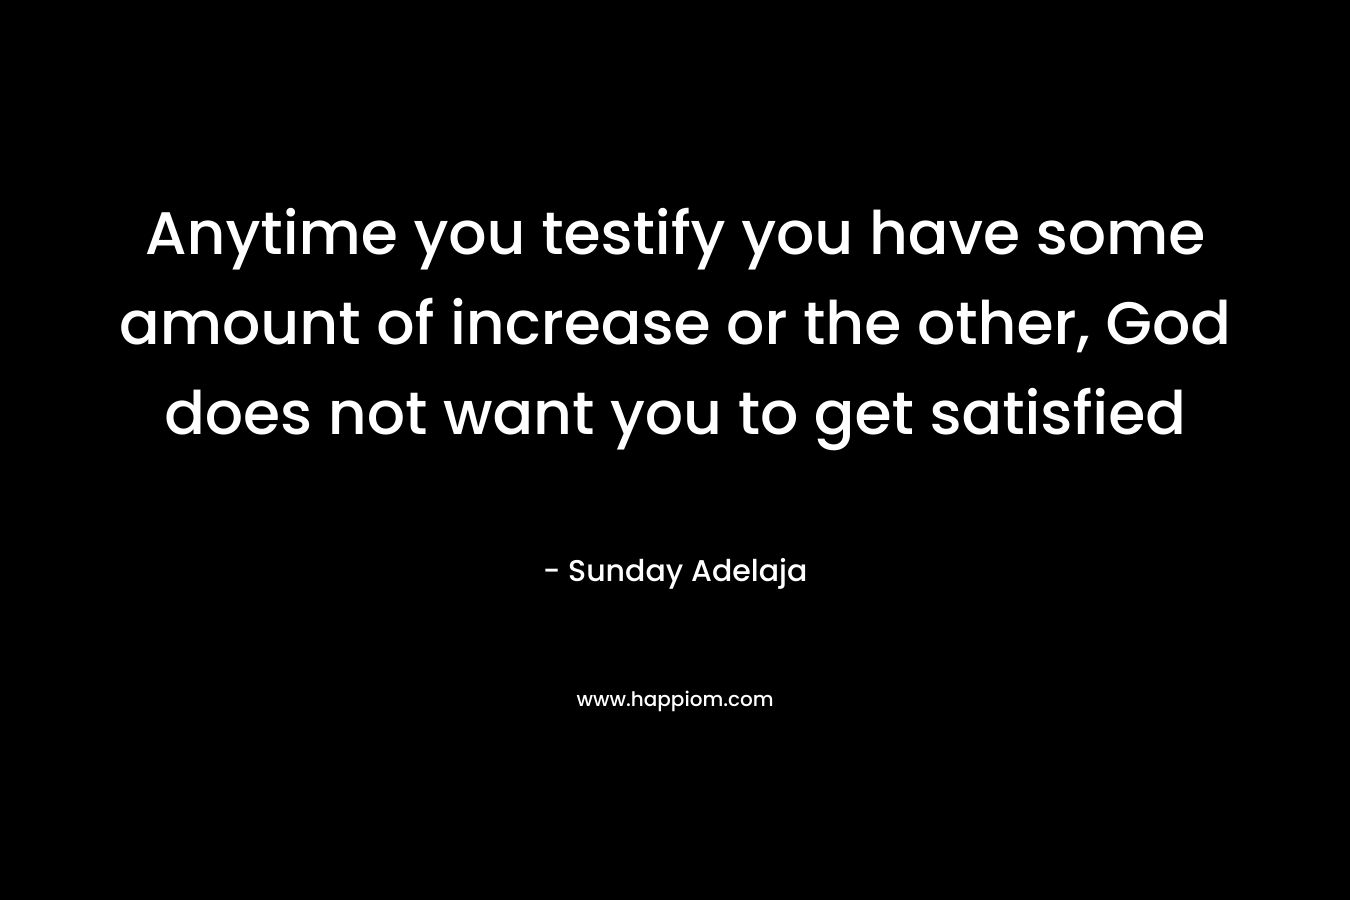 Anytime you testify you have some amount of increase or the other, God does not want you to get satisfied – Sunday Adelaja